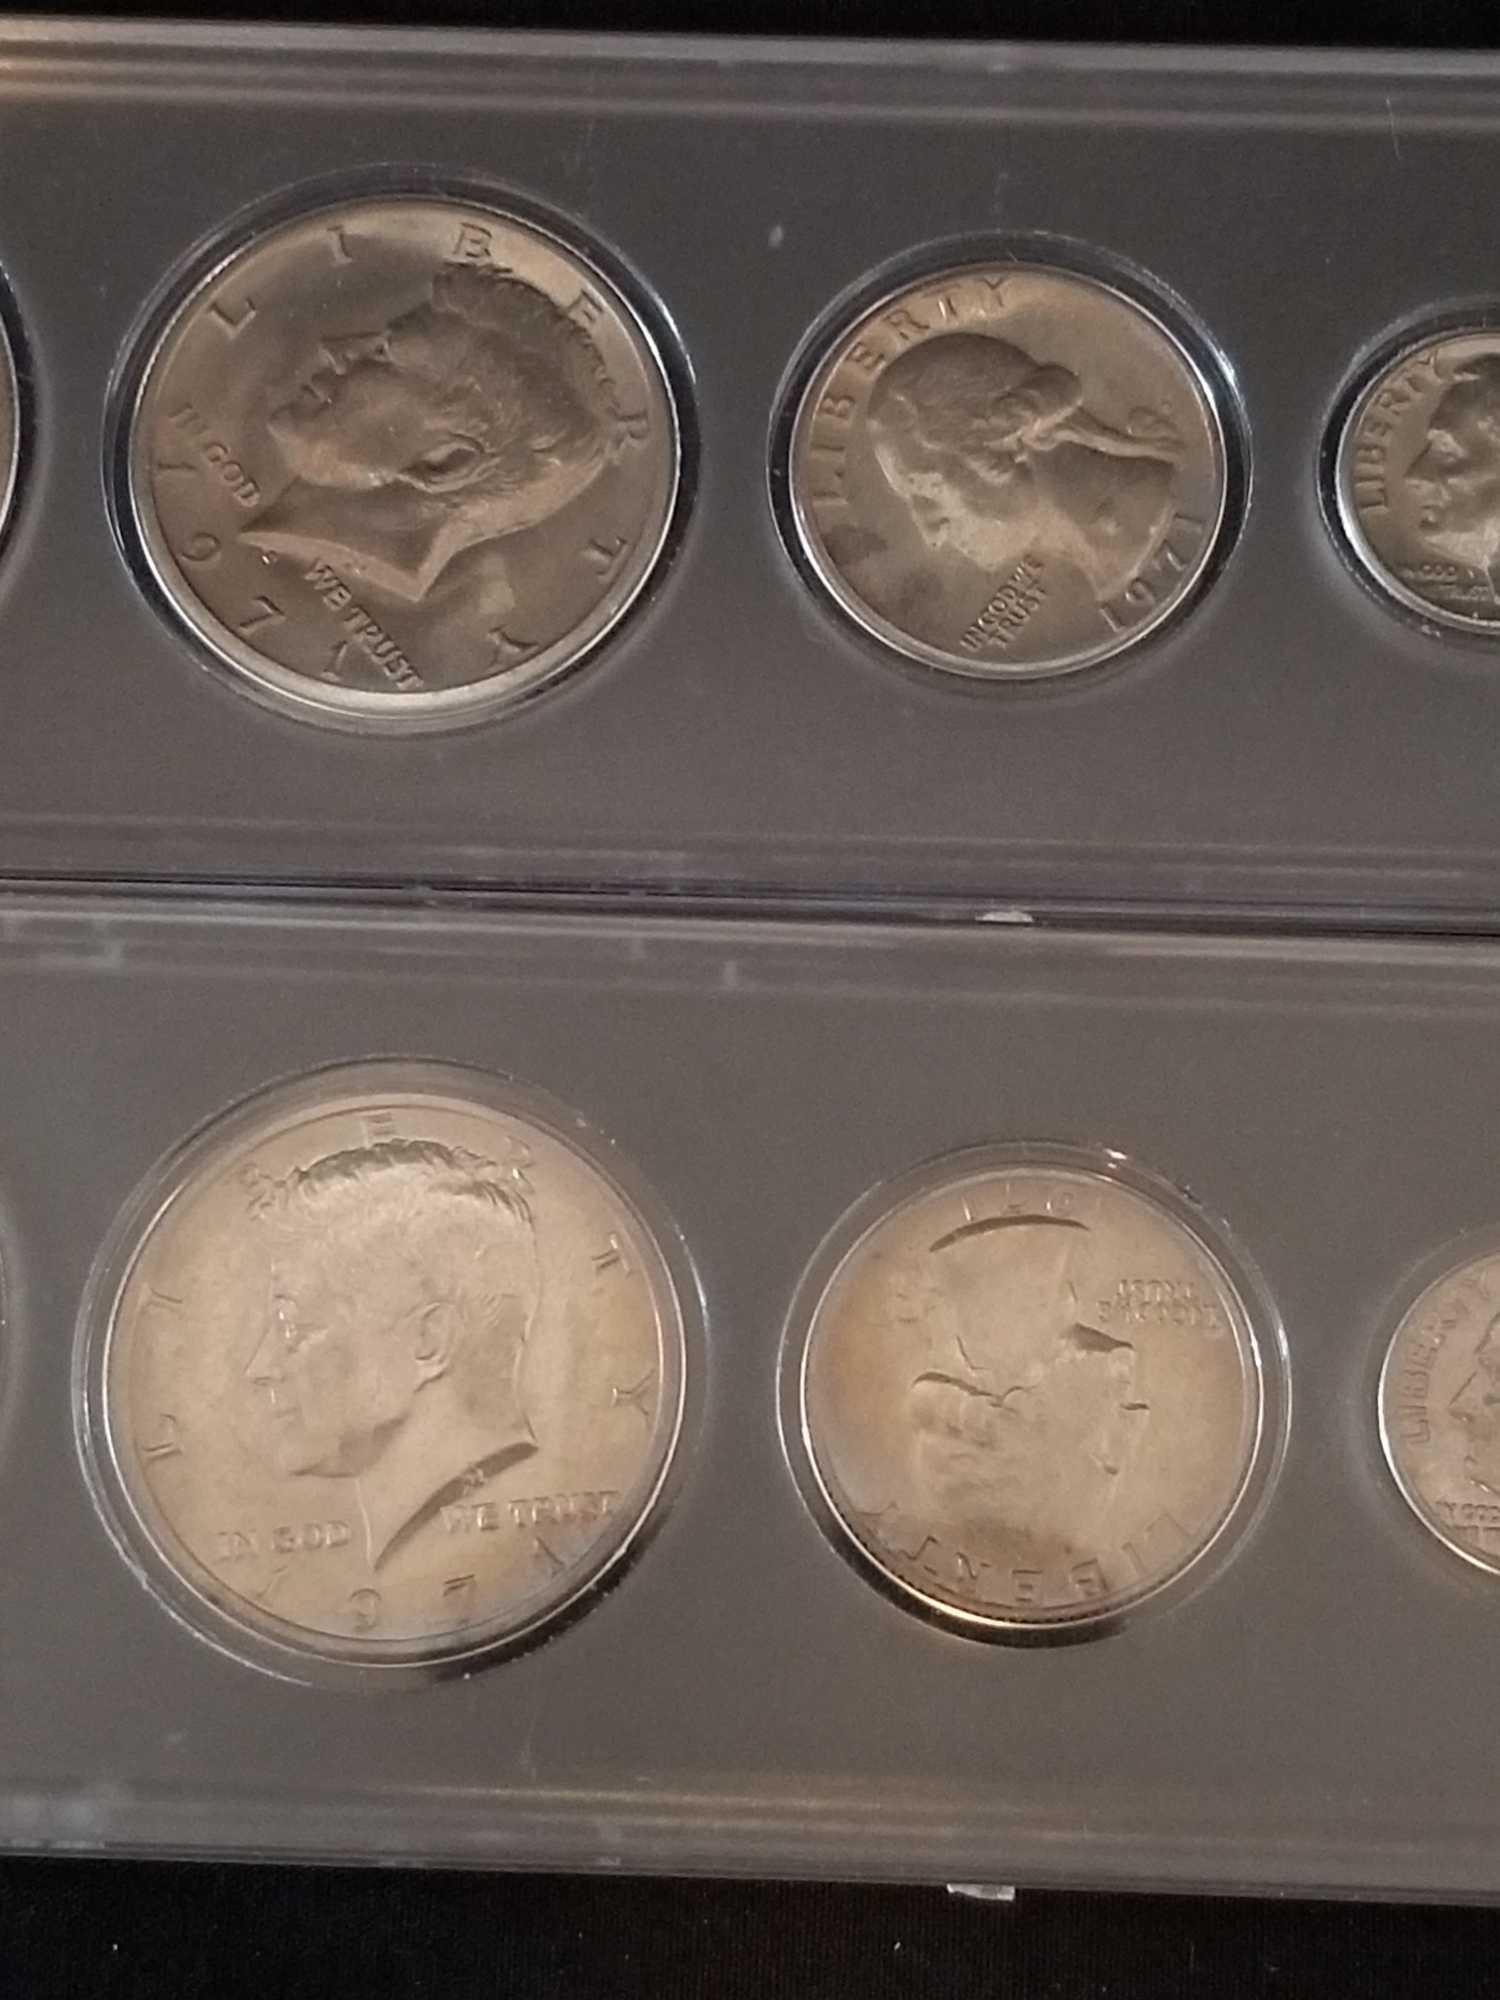 1971-P and D 6 Coin Set In Case